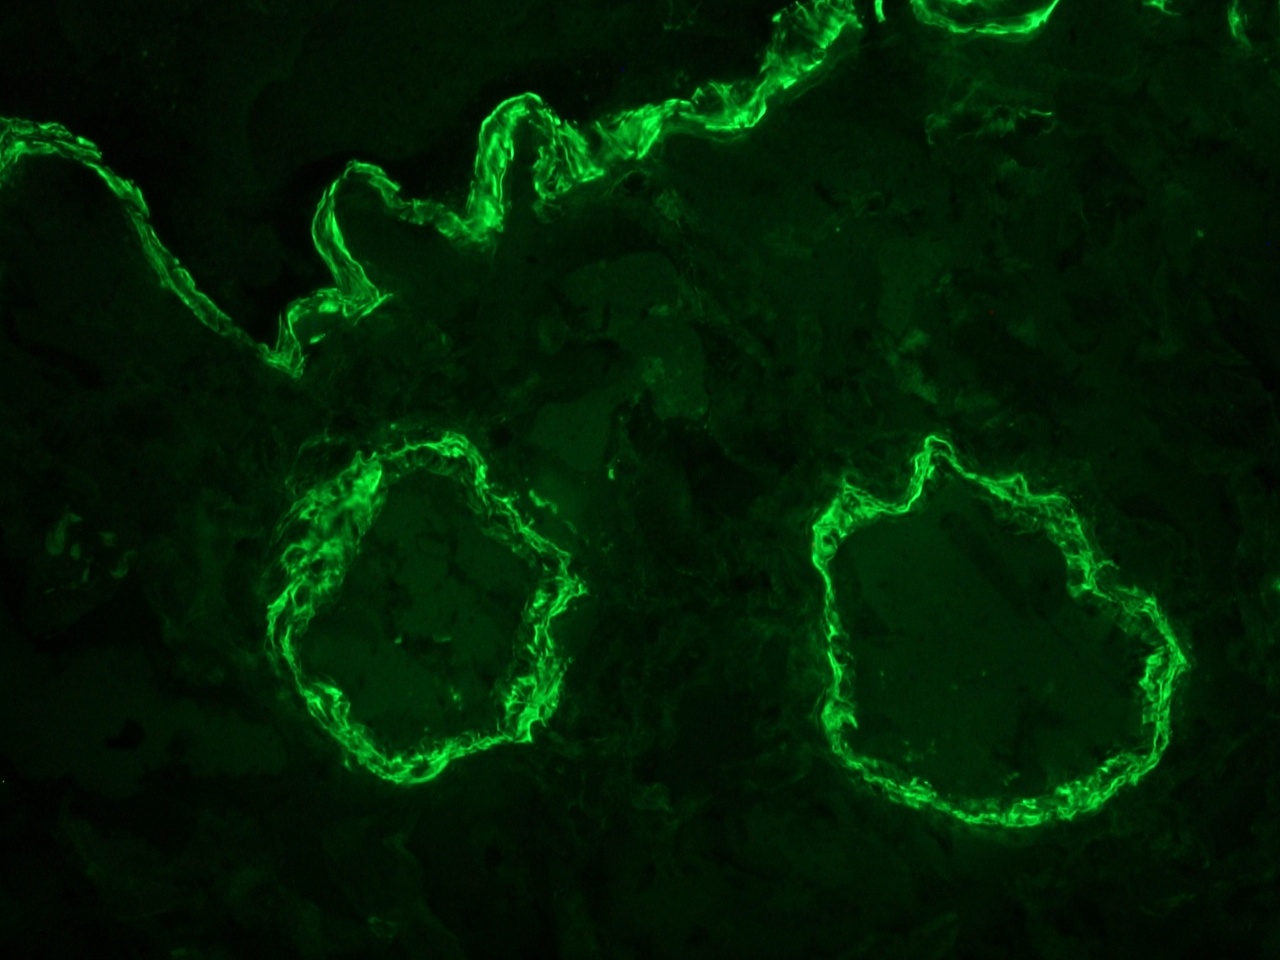 Figure 2. Indirect immunofluoresence staining of a frozen section of human colon using MUB0100P (clone 1A4) showing strong reactivity on the smooth muscle cells at a dilution of 1:500.